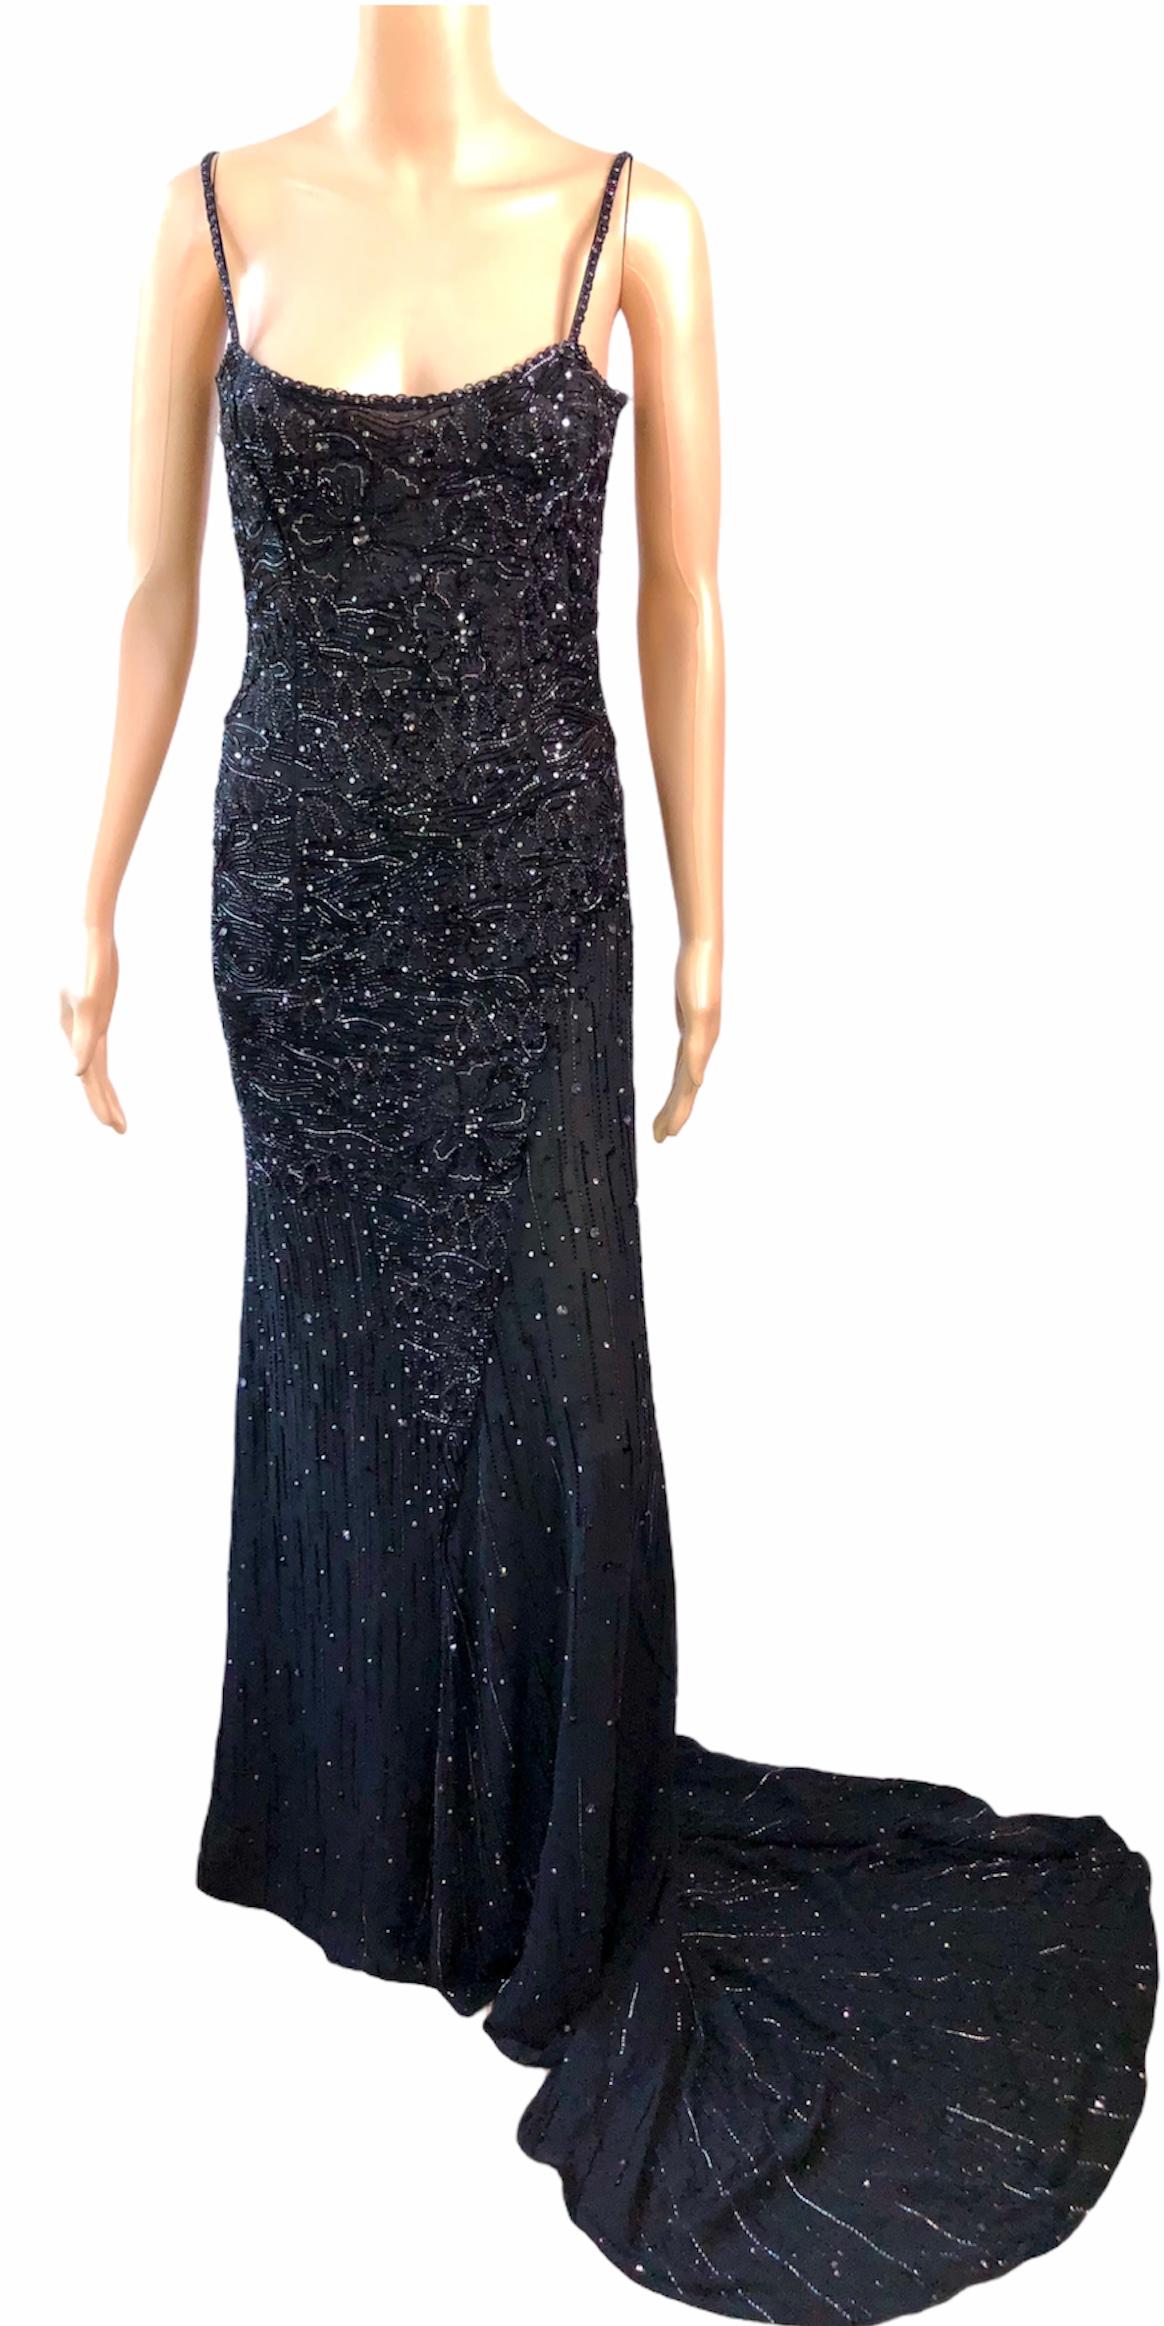 Atelier Versace Haute Couture F/W 1998 Crystal Embellished Cutout Train Gown For Sale 1